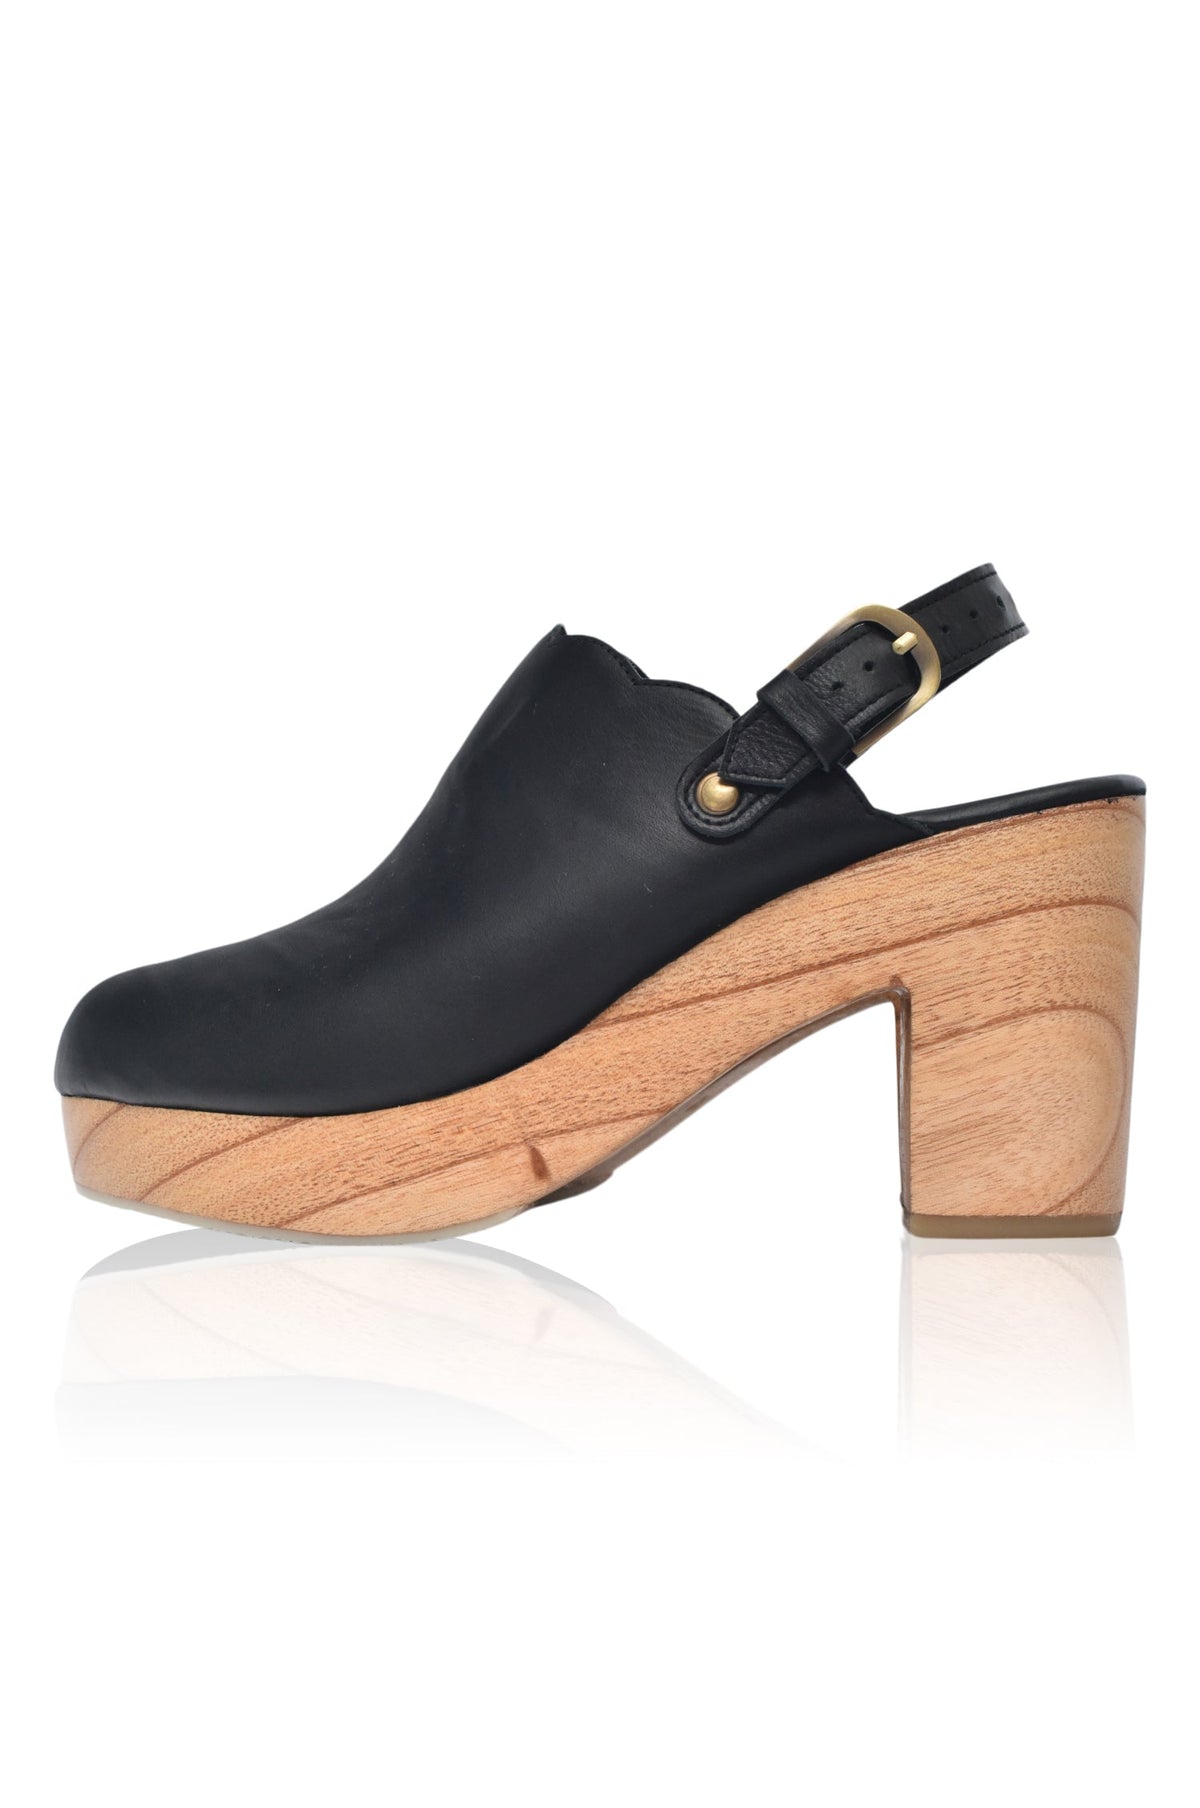 Sierra Convertible Leather Clogs by ELF